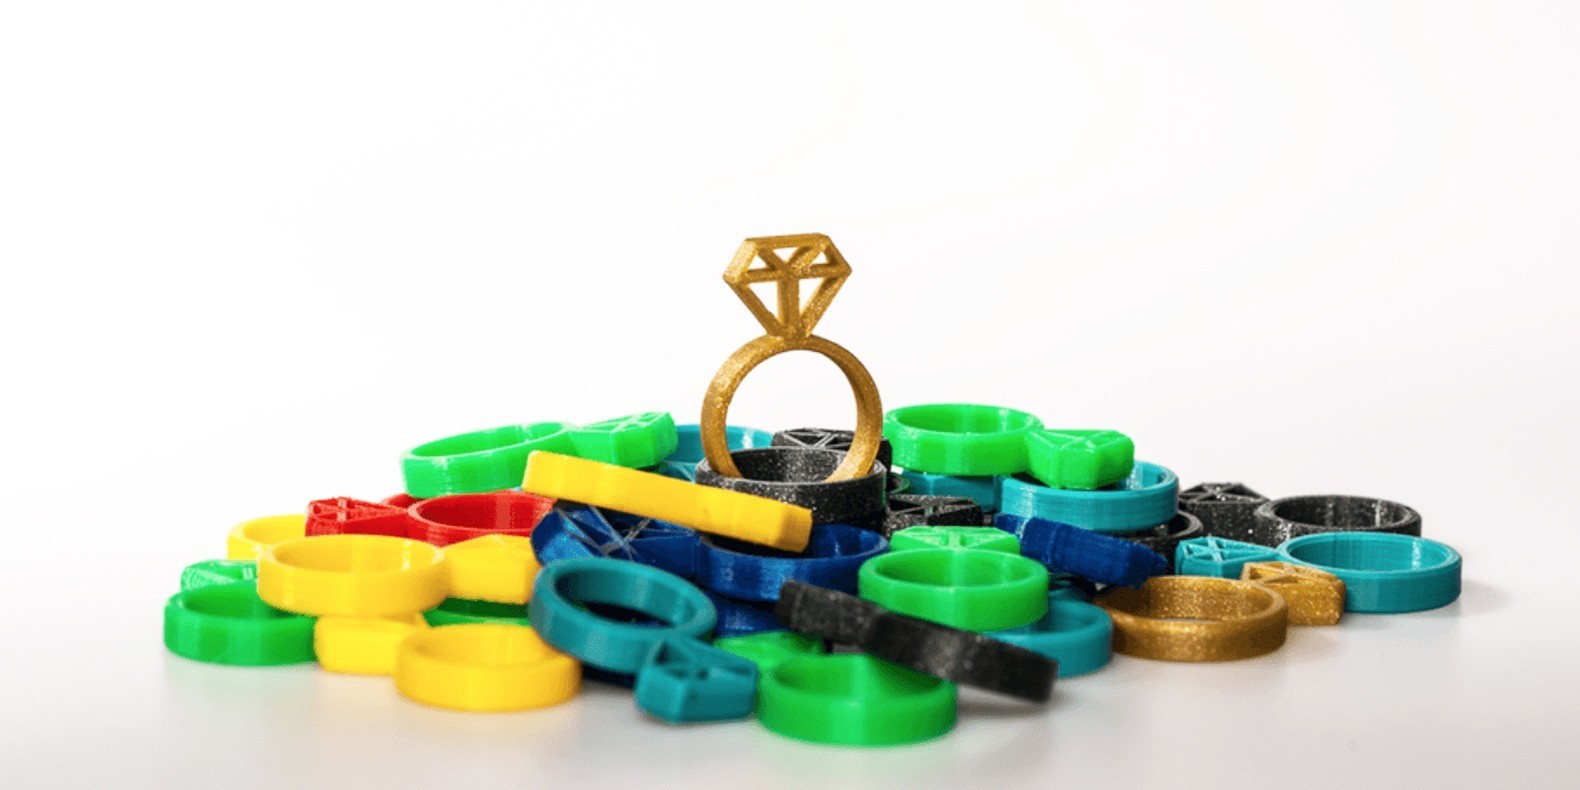 Here is a selection of the best rings 3D models to make with a 3D printer